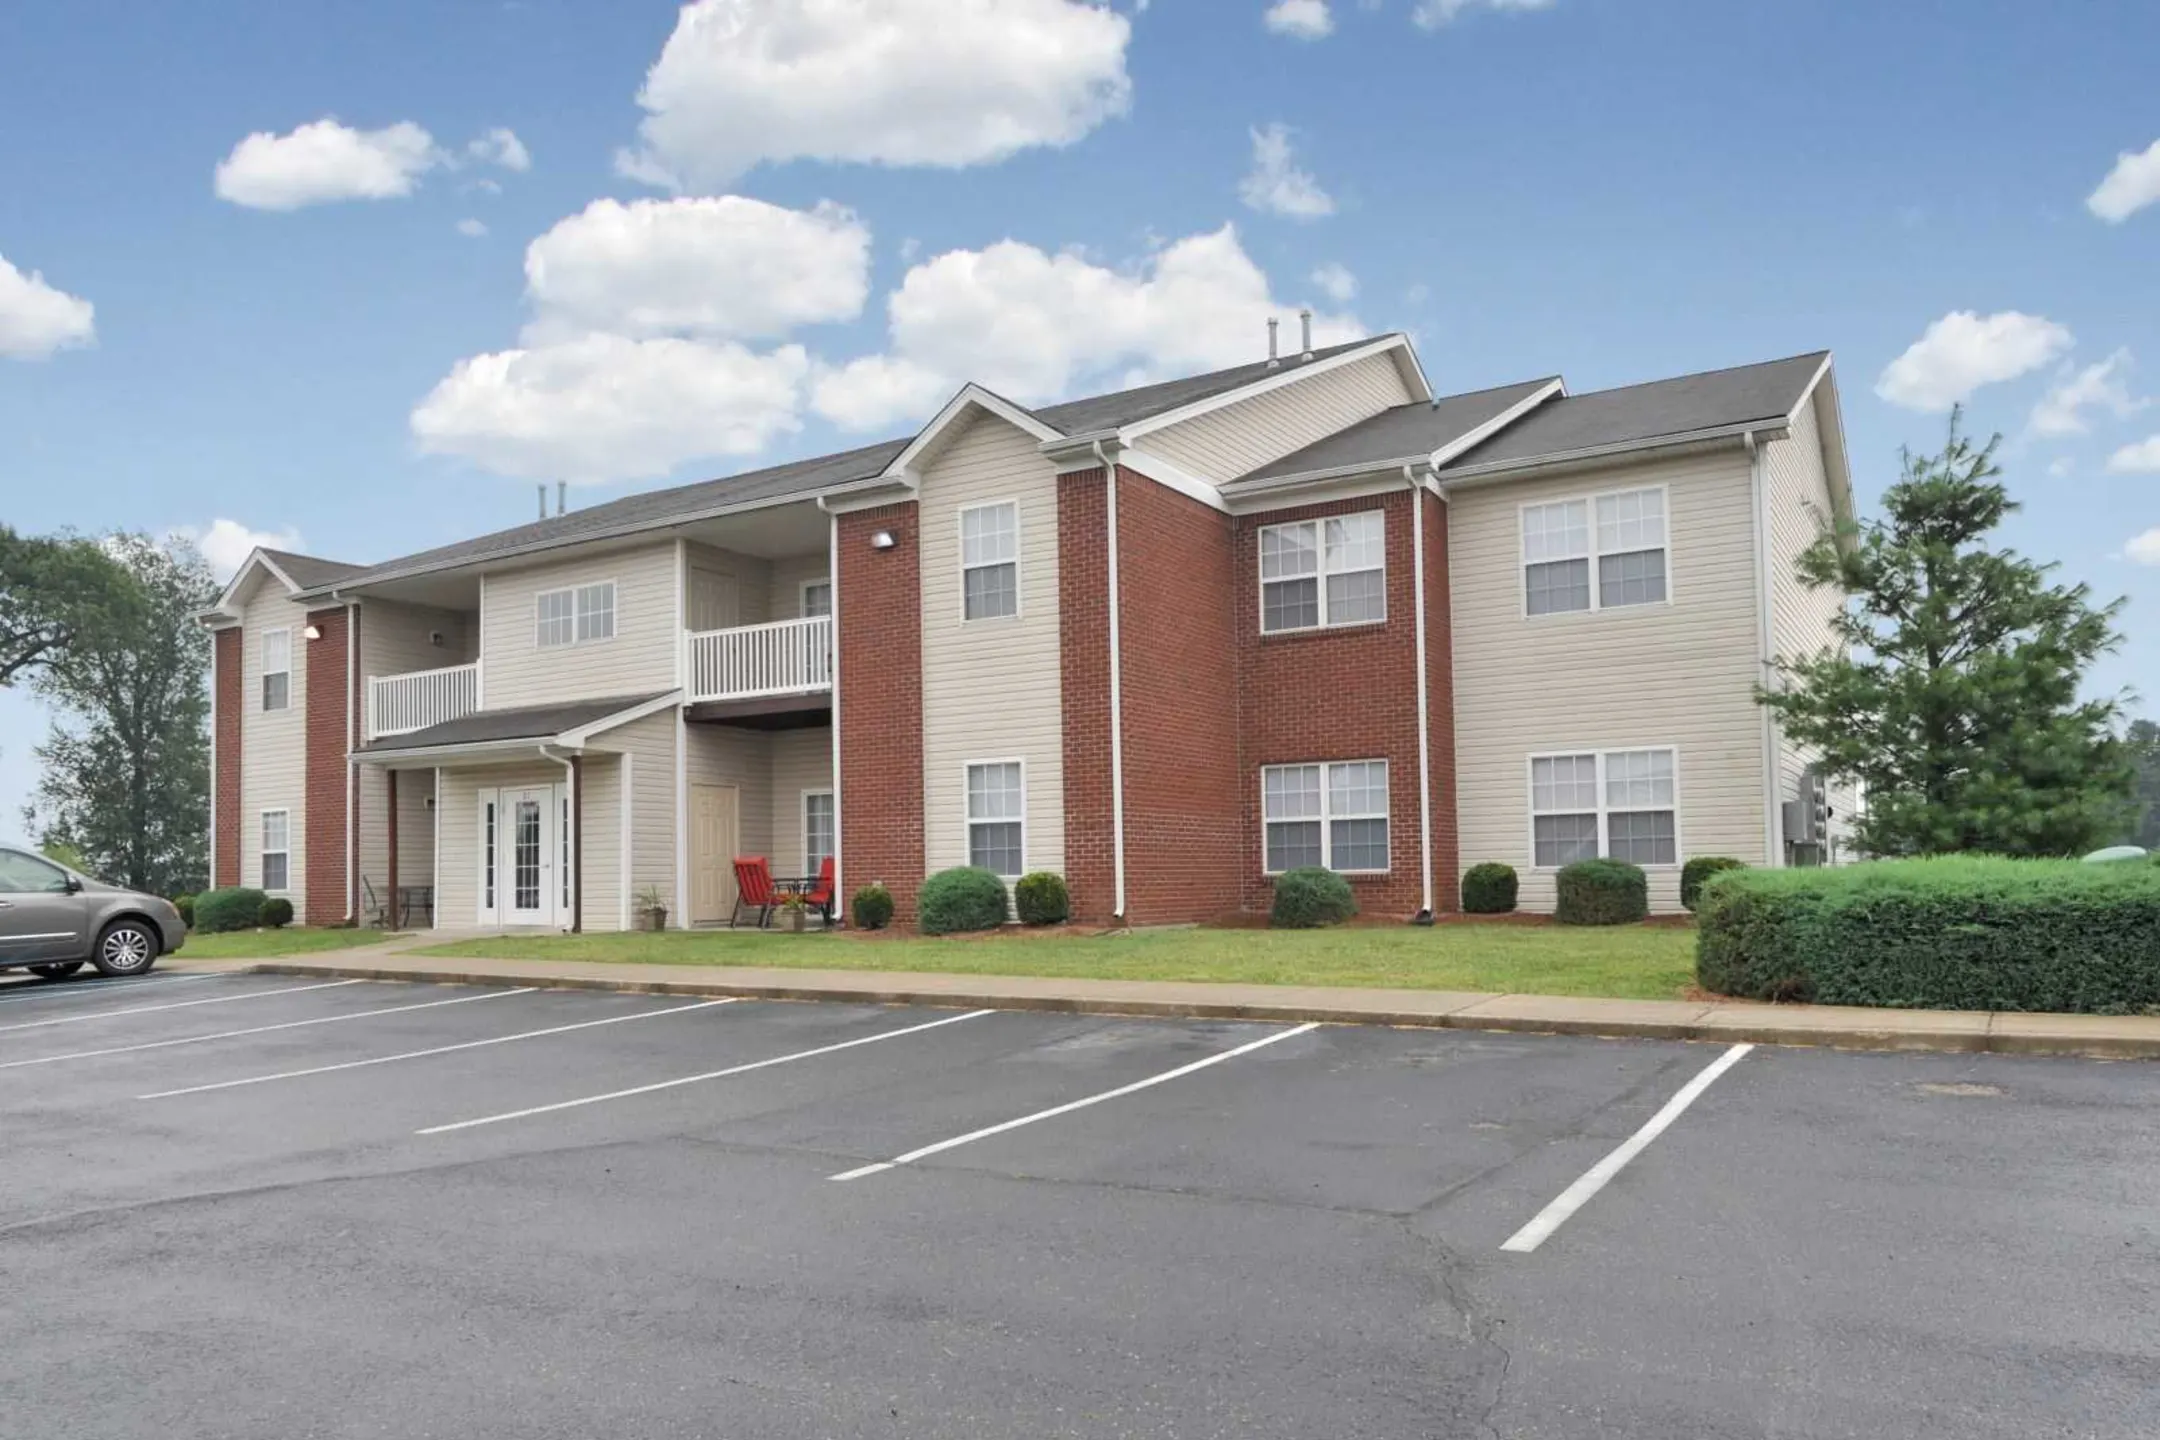 Building - Lighthouse Apartments At Pebble Creek - Jeffersonville, IN